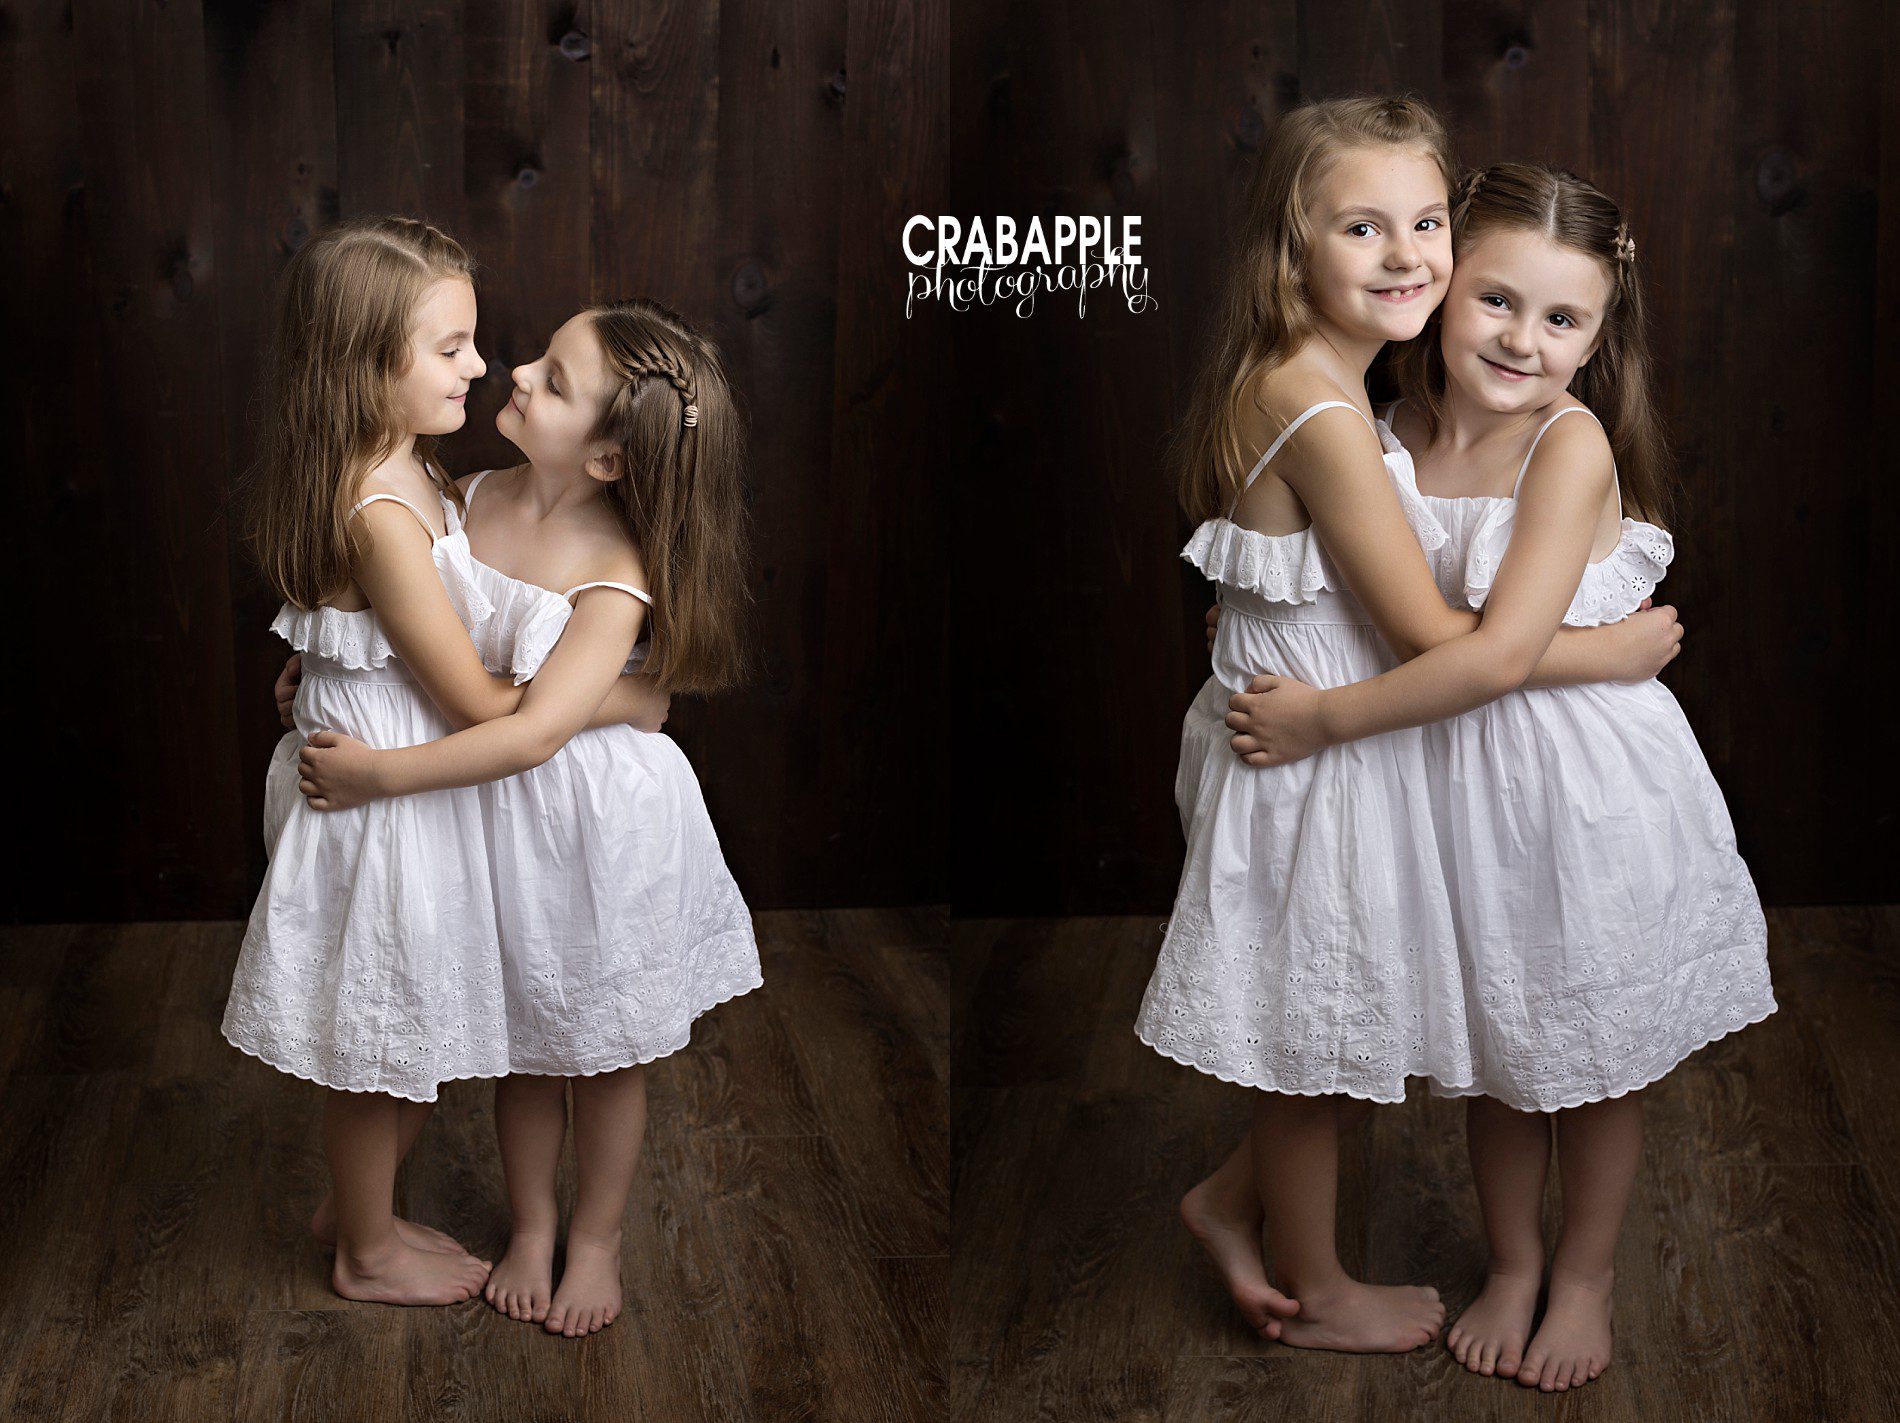 pose ideas for sisters for portraits